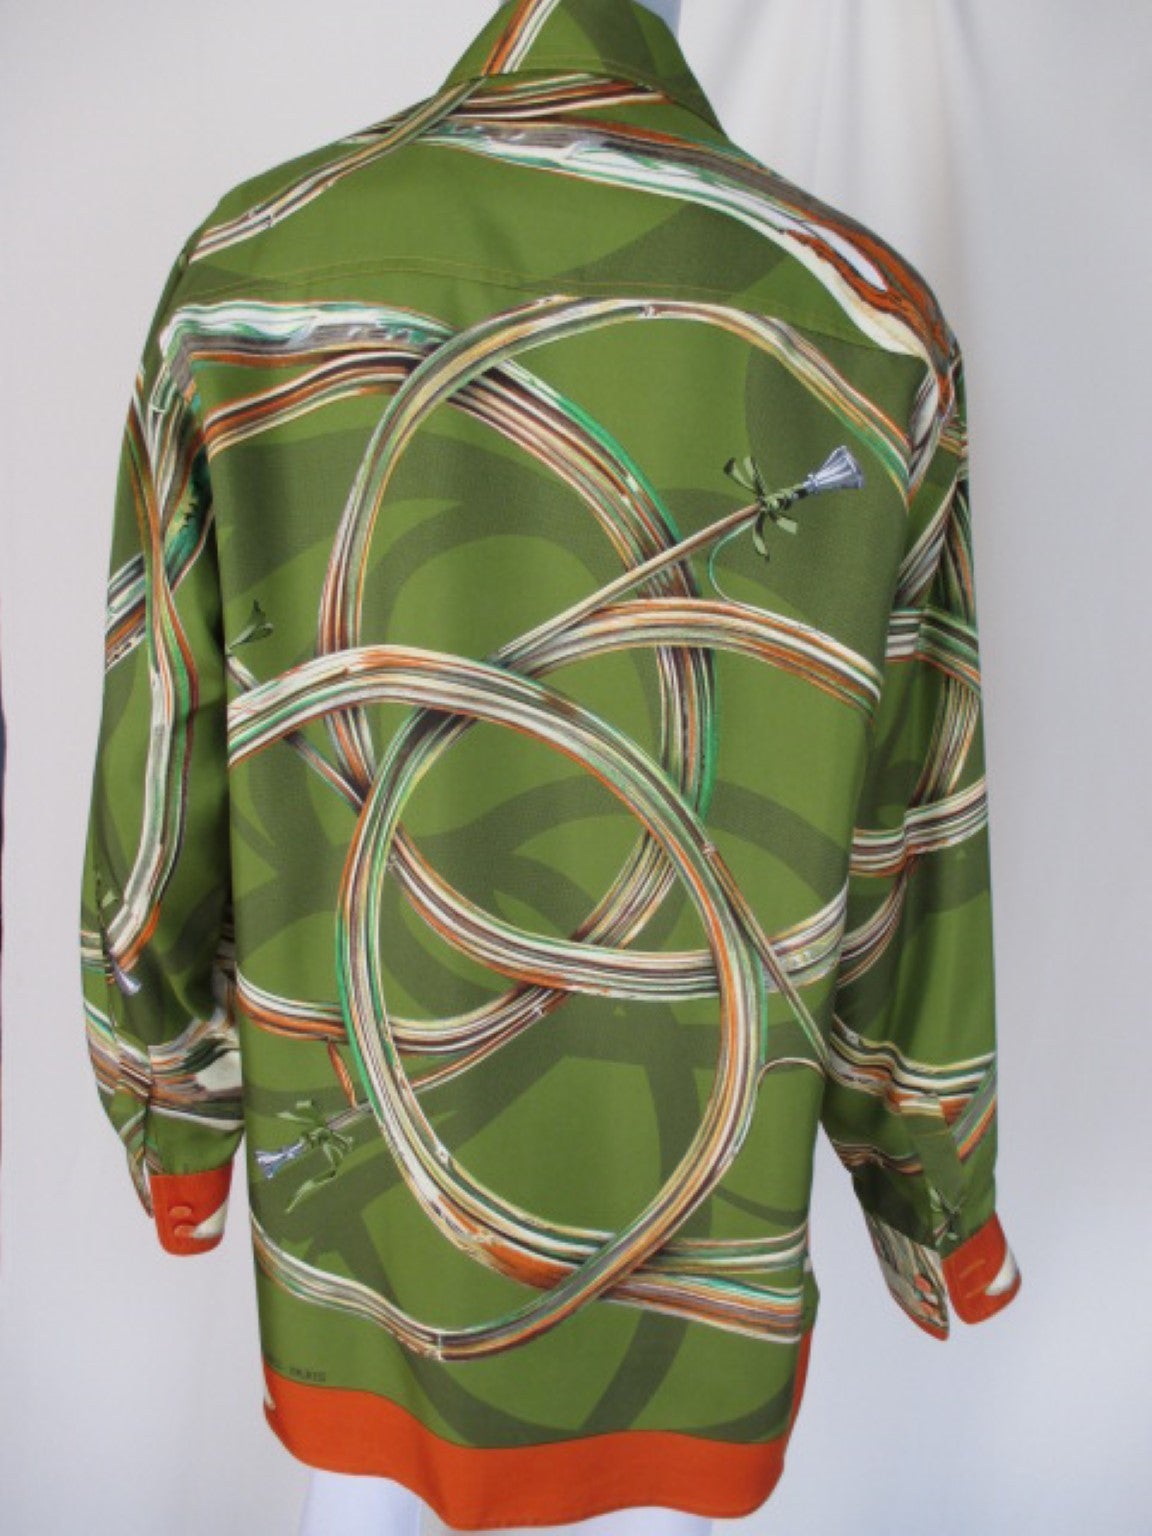 Hermes printed blouse with French horn designed by de Linares.
Color  is orange and green,
100% silk.
Size is eu 42